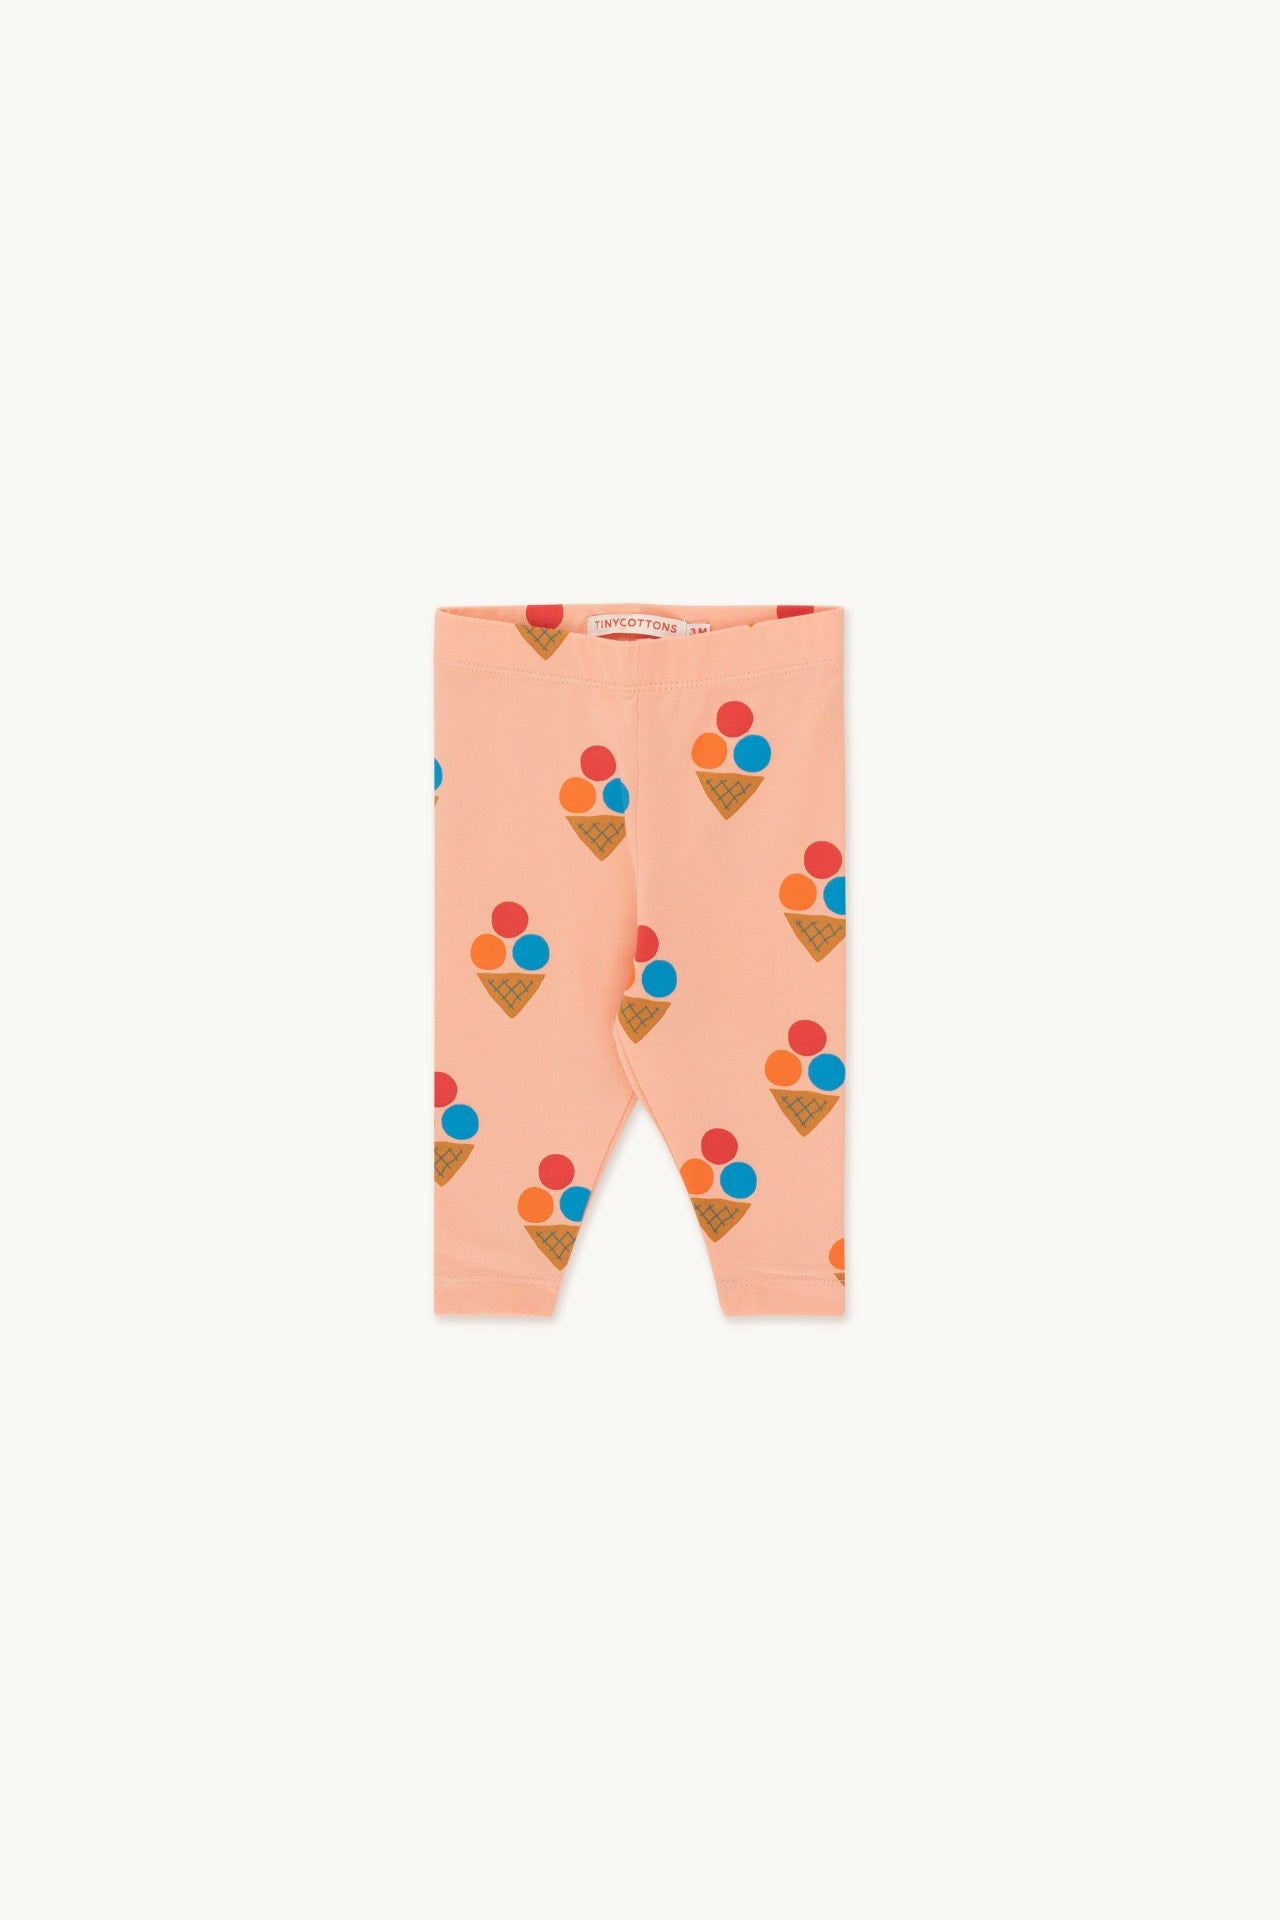 Light pink leggings with a minimal ice cream print and elasticized waistband. Crafted from soft pima cotton for maximum comfort. Made in Portugal.